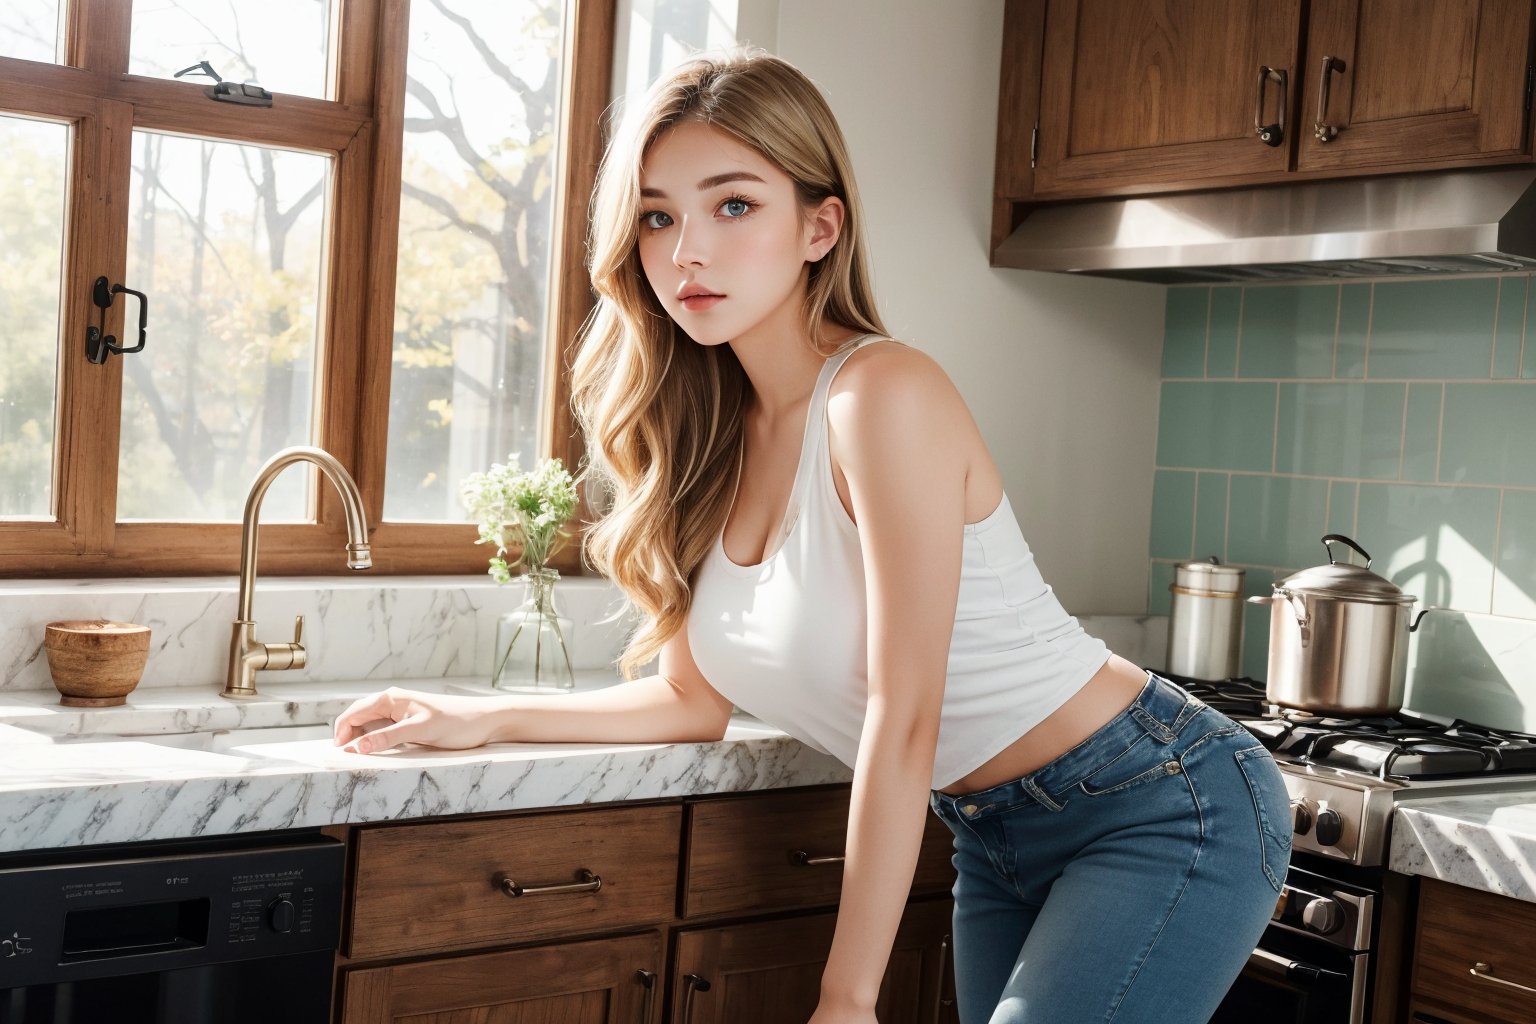 Here's your photorealistic prompt:

A 23-year-old woman with piercing baby blue eyes and long blonde hair styled consistently throughout stands confidently in a bright, airy kitchen. She wears a trendy white tank top and high-waisted distressed denim jeans, her toned legs and arms on full display. Her defined nose and symmetrical eyes shine under the soft morning light streaming through the windows. The camera captures her flawless complexion from a slight overhead angle, emphasizing her athletic build as she leans against the kitchen island, hand resting on the counter.